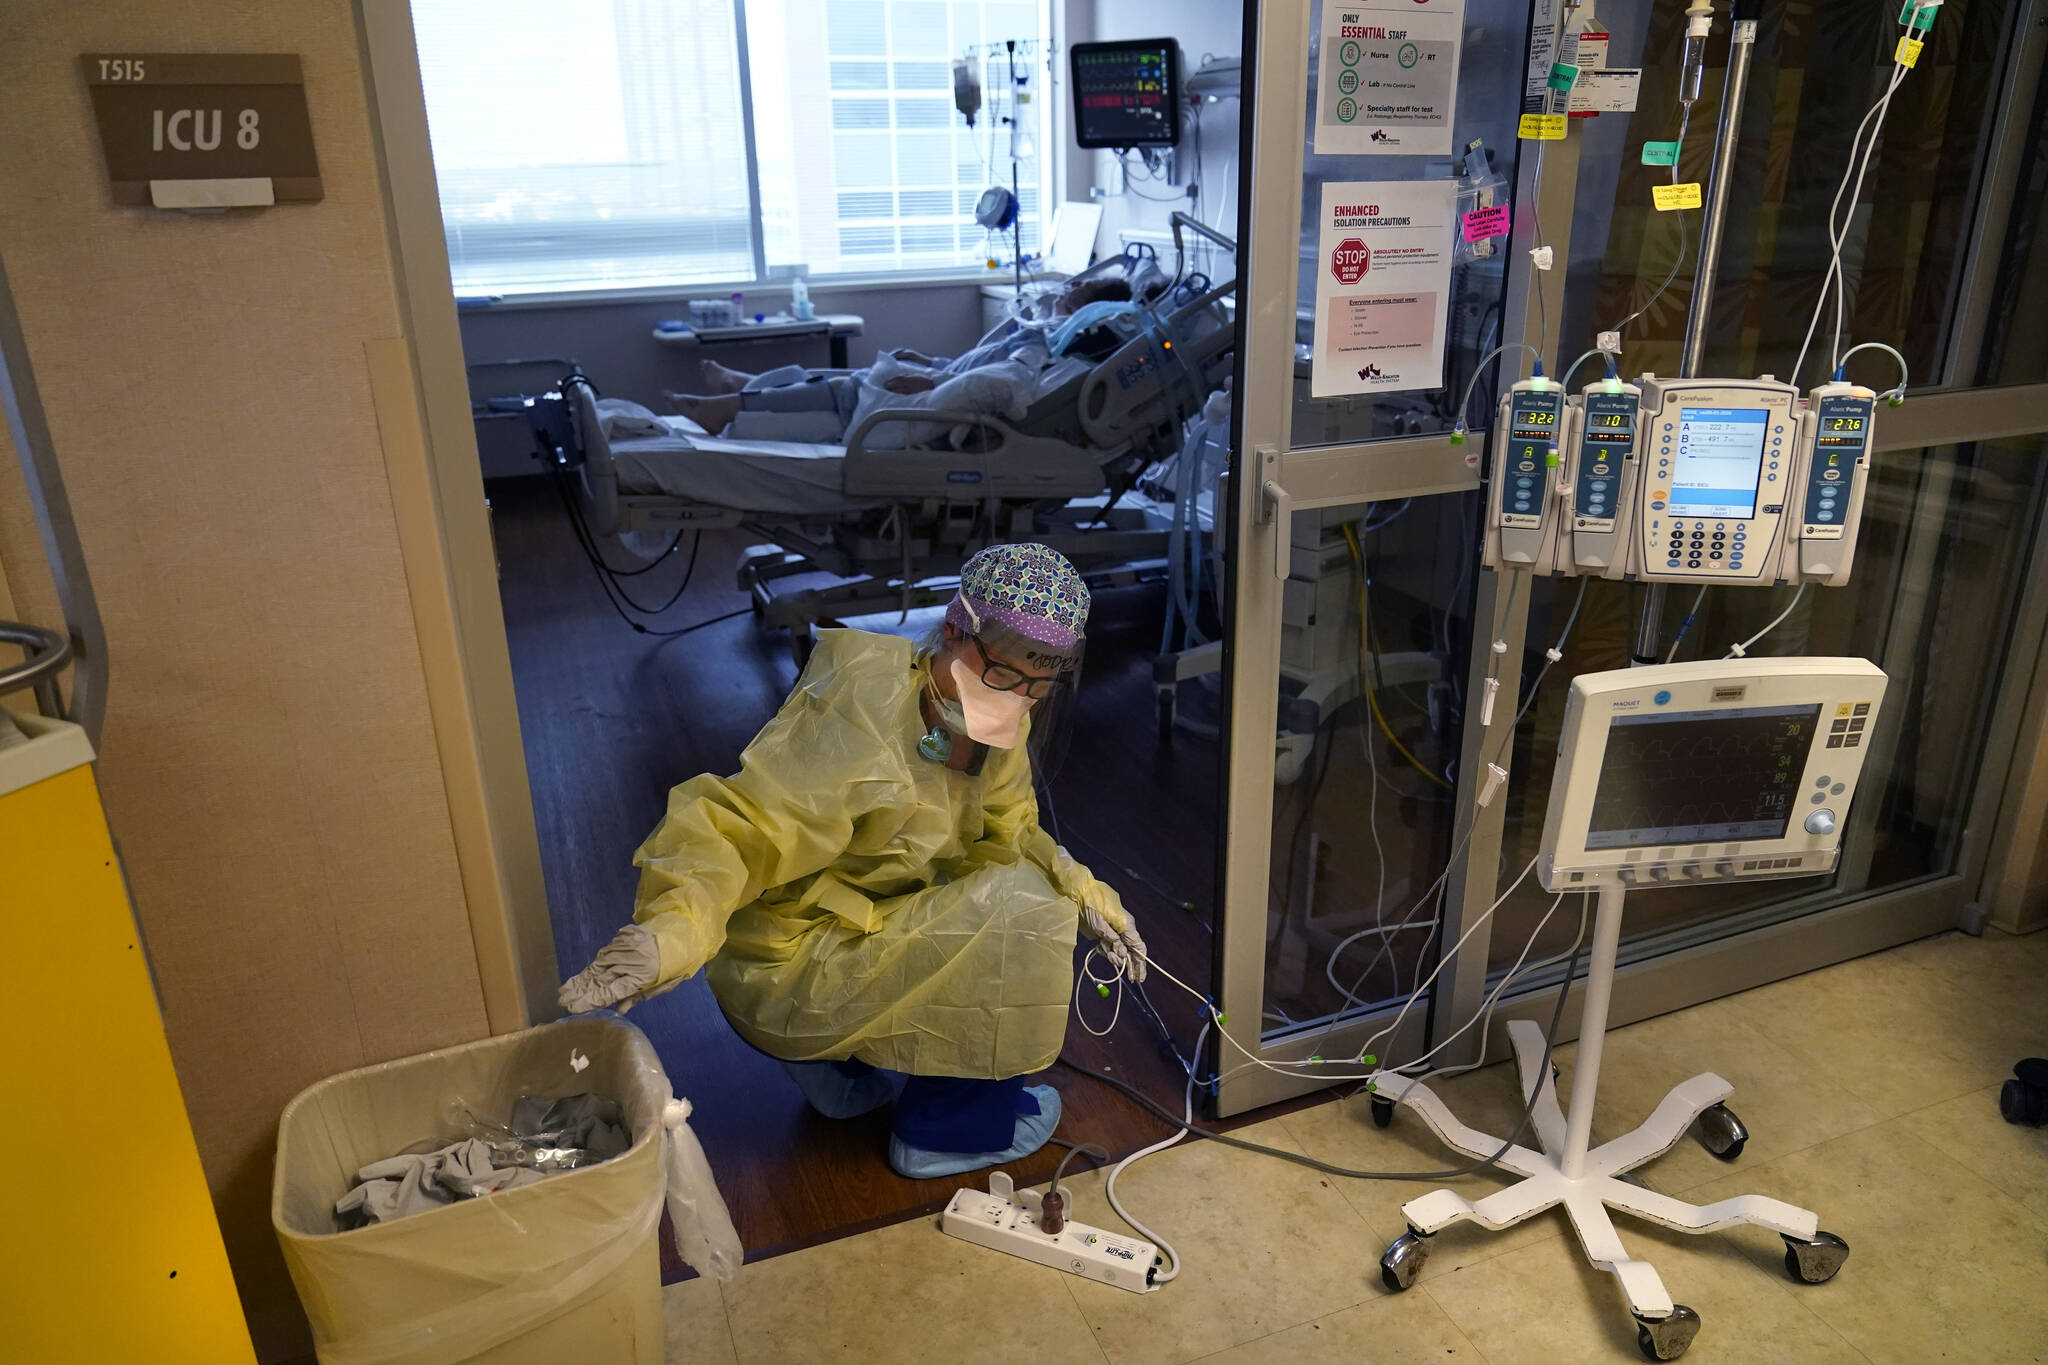 An ICU nurse, moves electrical cords for medical machines, outside the room of a patient suffering from COVID-19, in an intensive care unit at the Willis-Knighton Medical Center in Shreveport, La. The COVID-19 pandemic has created a nurse staffing crisis that is forcing many U.S. hospitals to pay top dollar to get the help they need to handle the crush of patients this summer. (AP Photo/ Gerald Herbert)